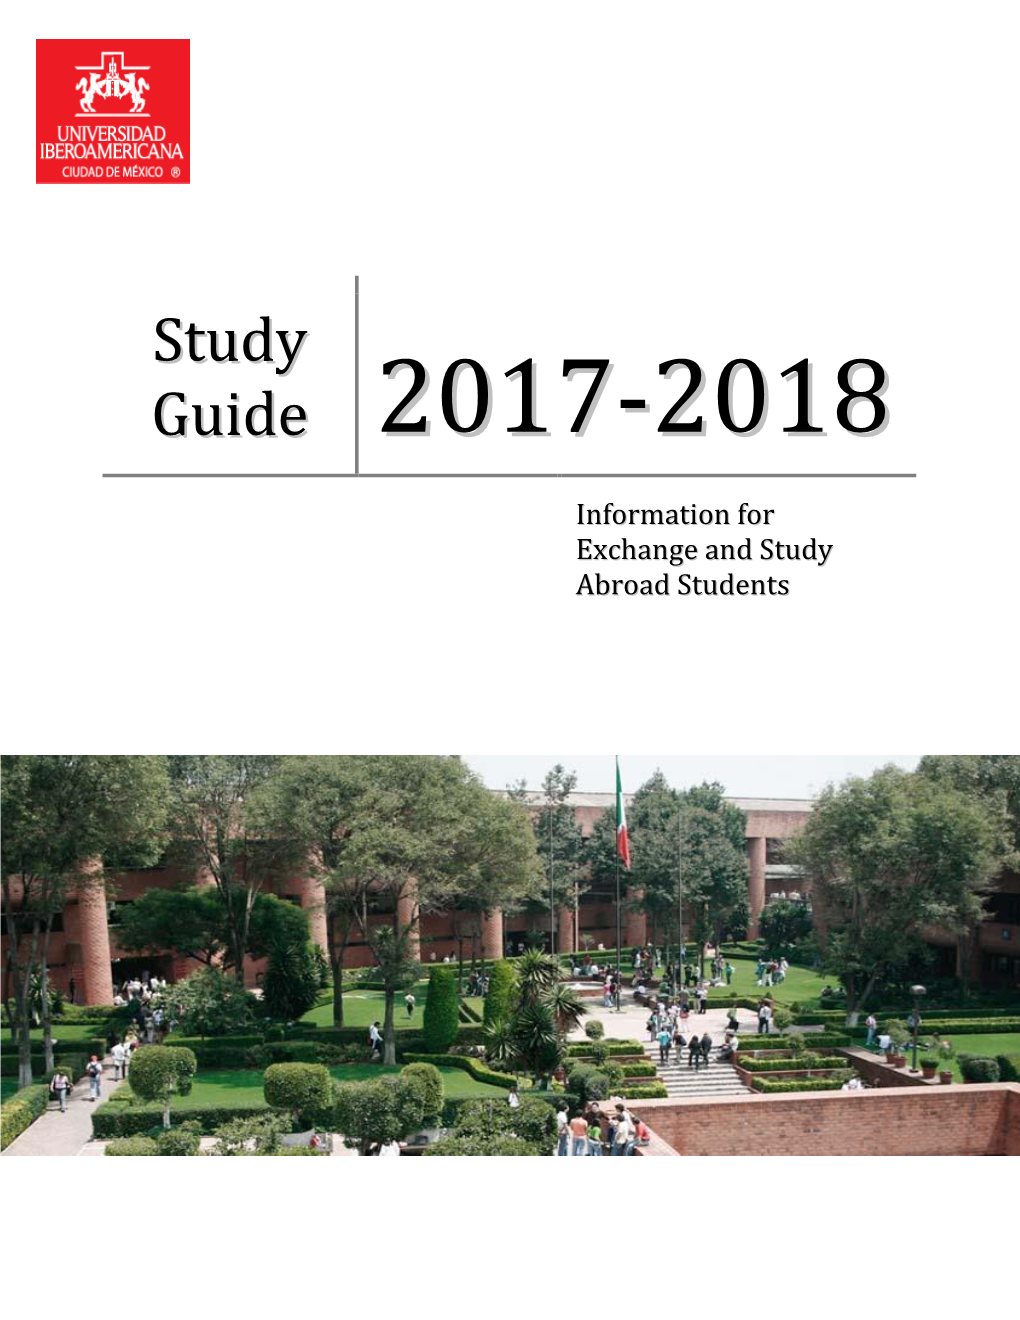 Study Guide You Will Find Comprehensive Information to Make Your Journey to Mexico a Positive One and Your Stay at the Ibero More Enjoyable